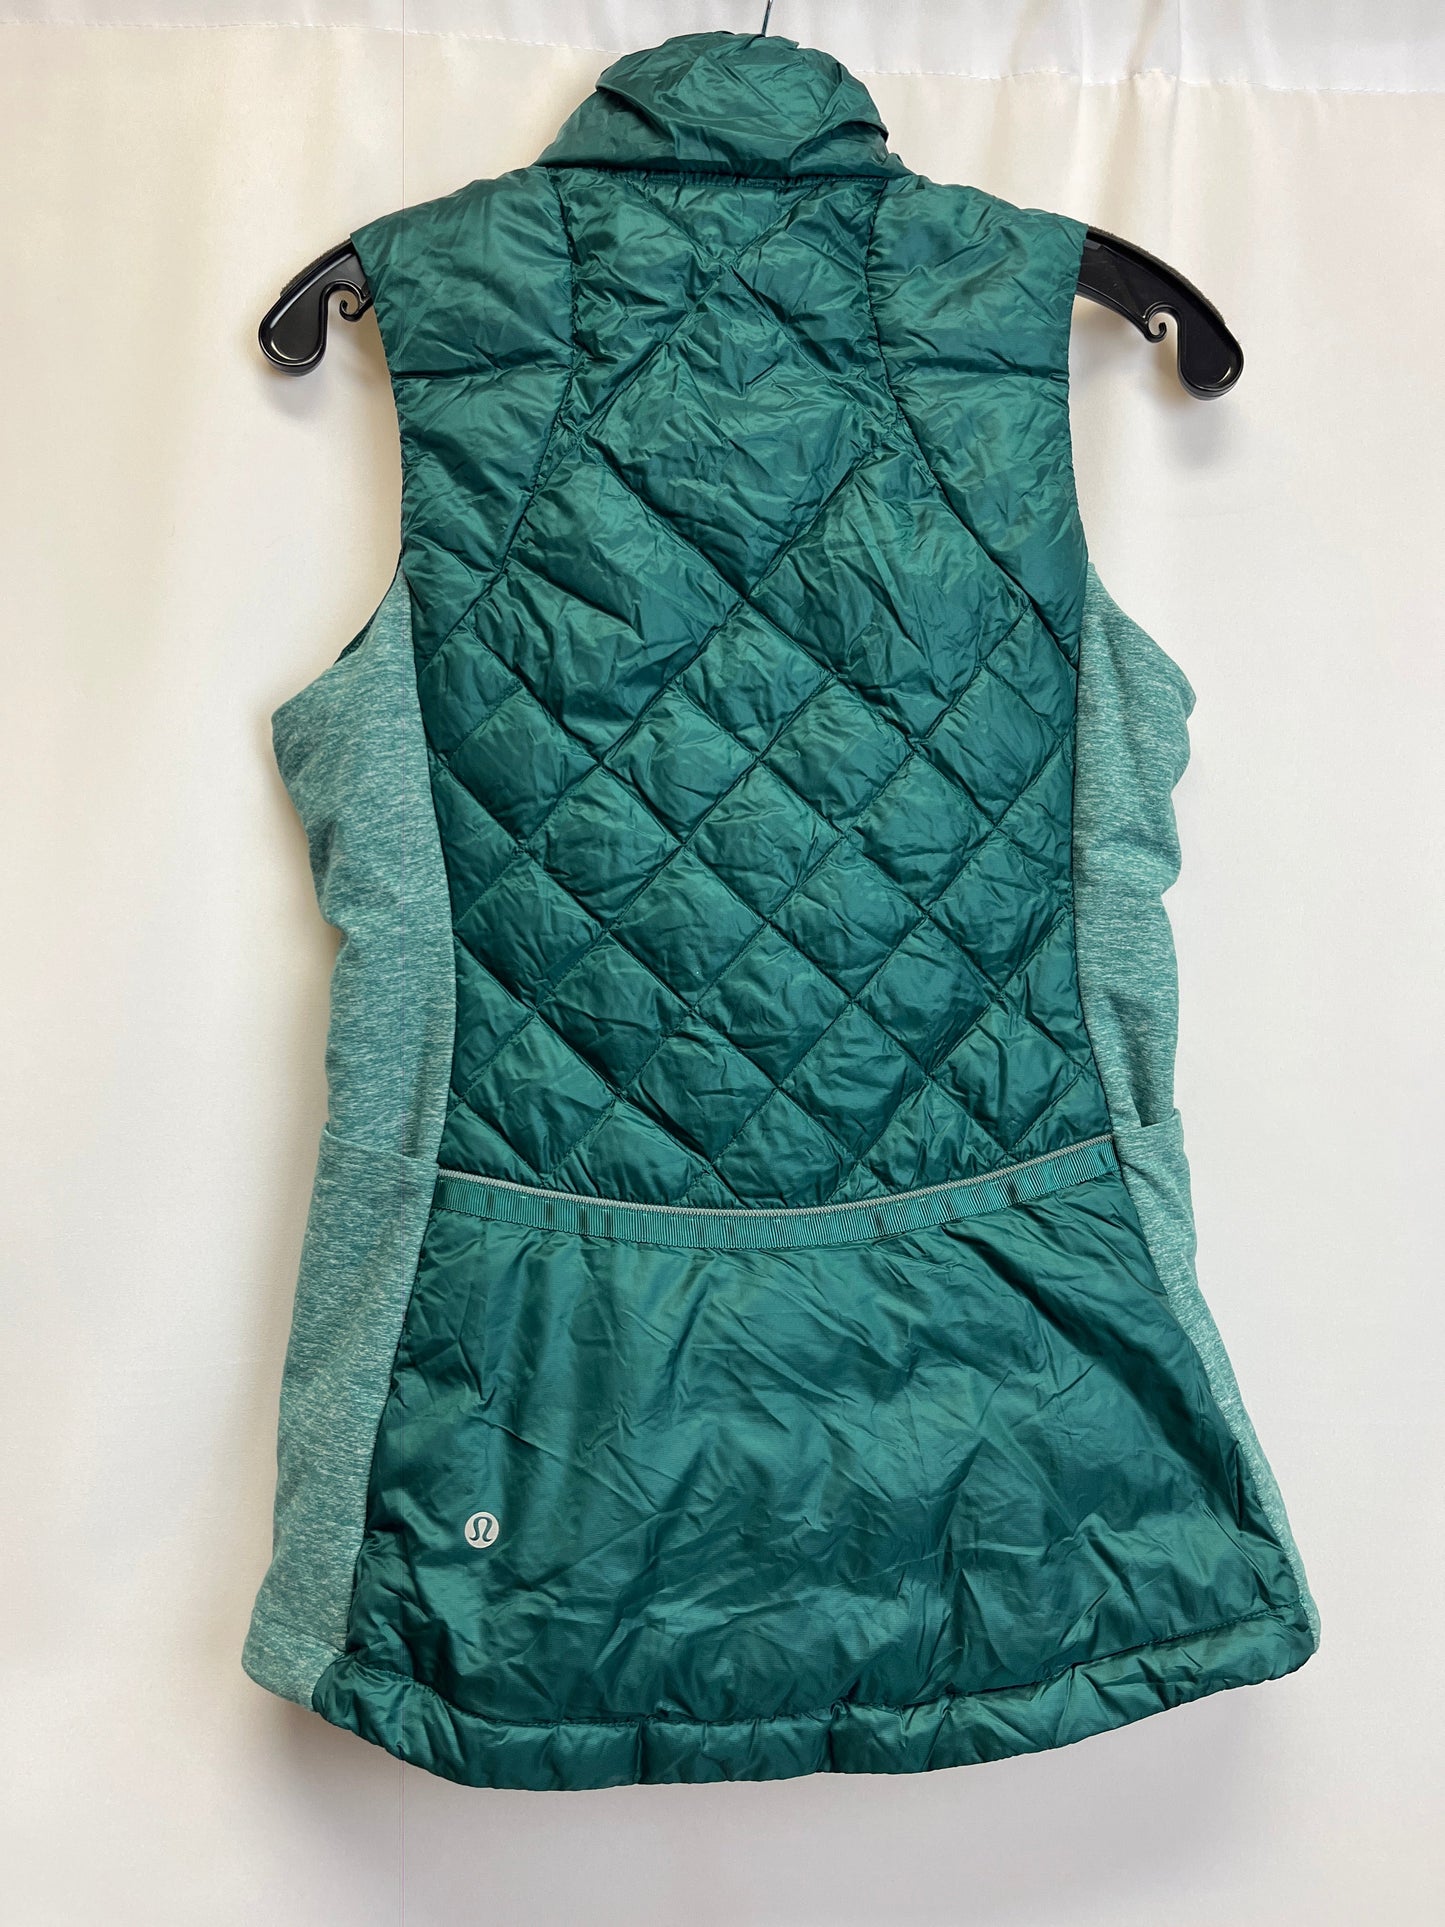 Vest Puffer & Quilted By Lululemon Size: 6